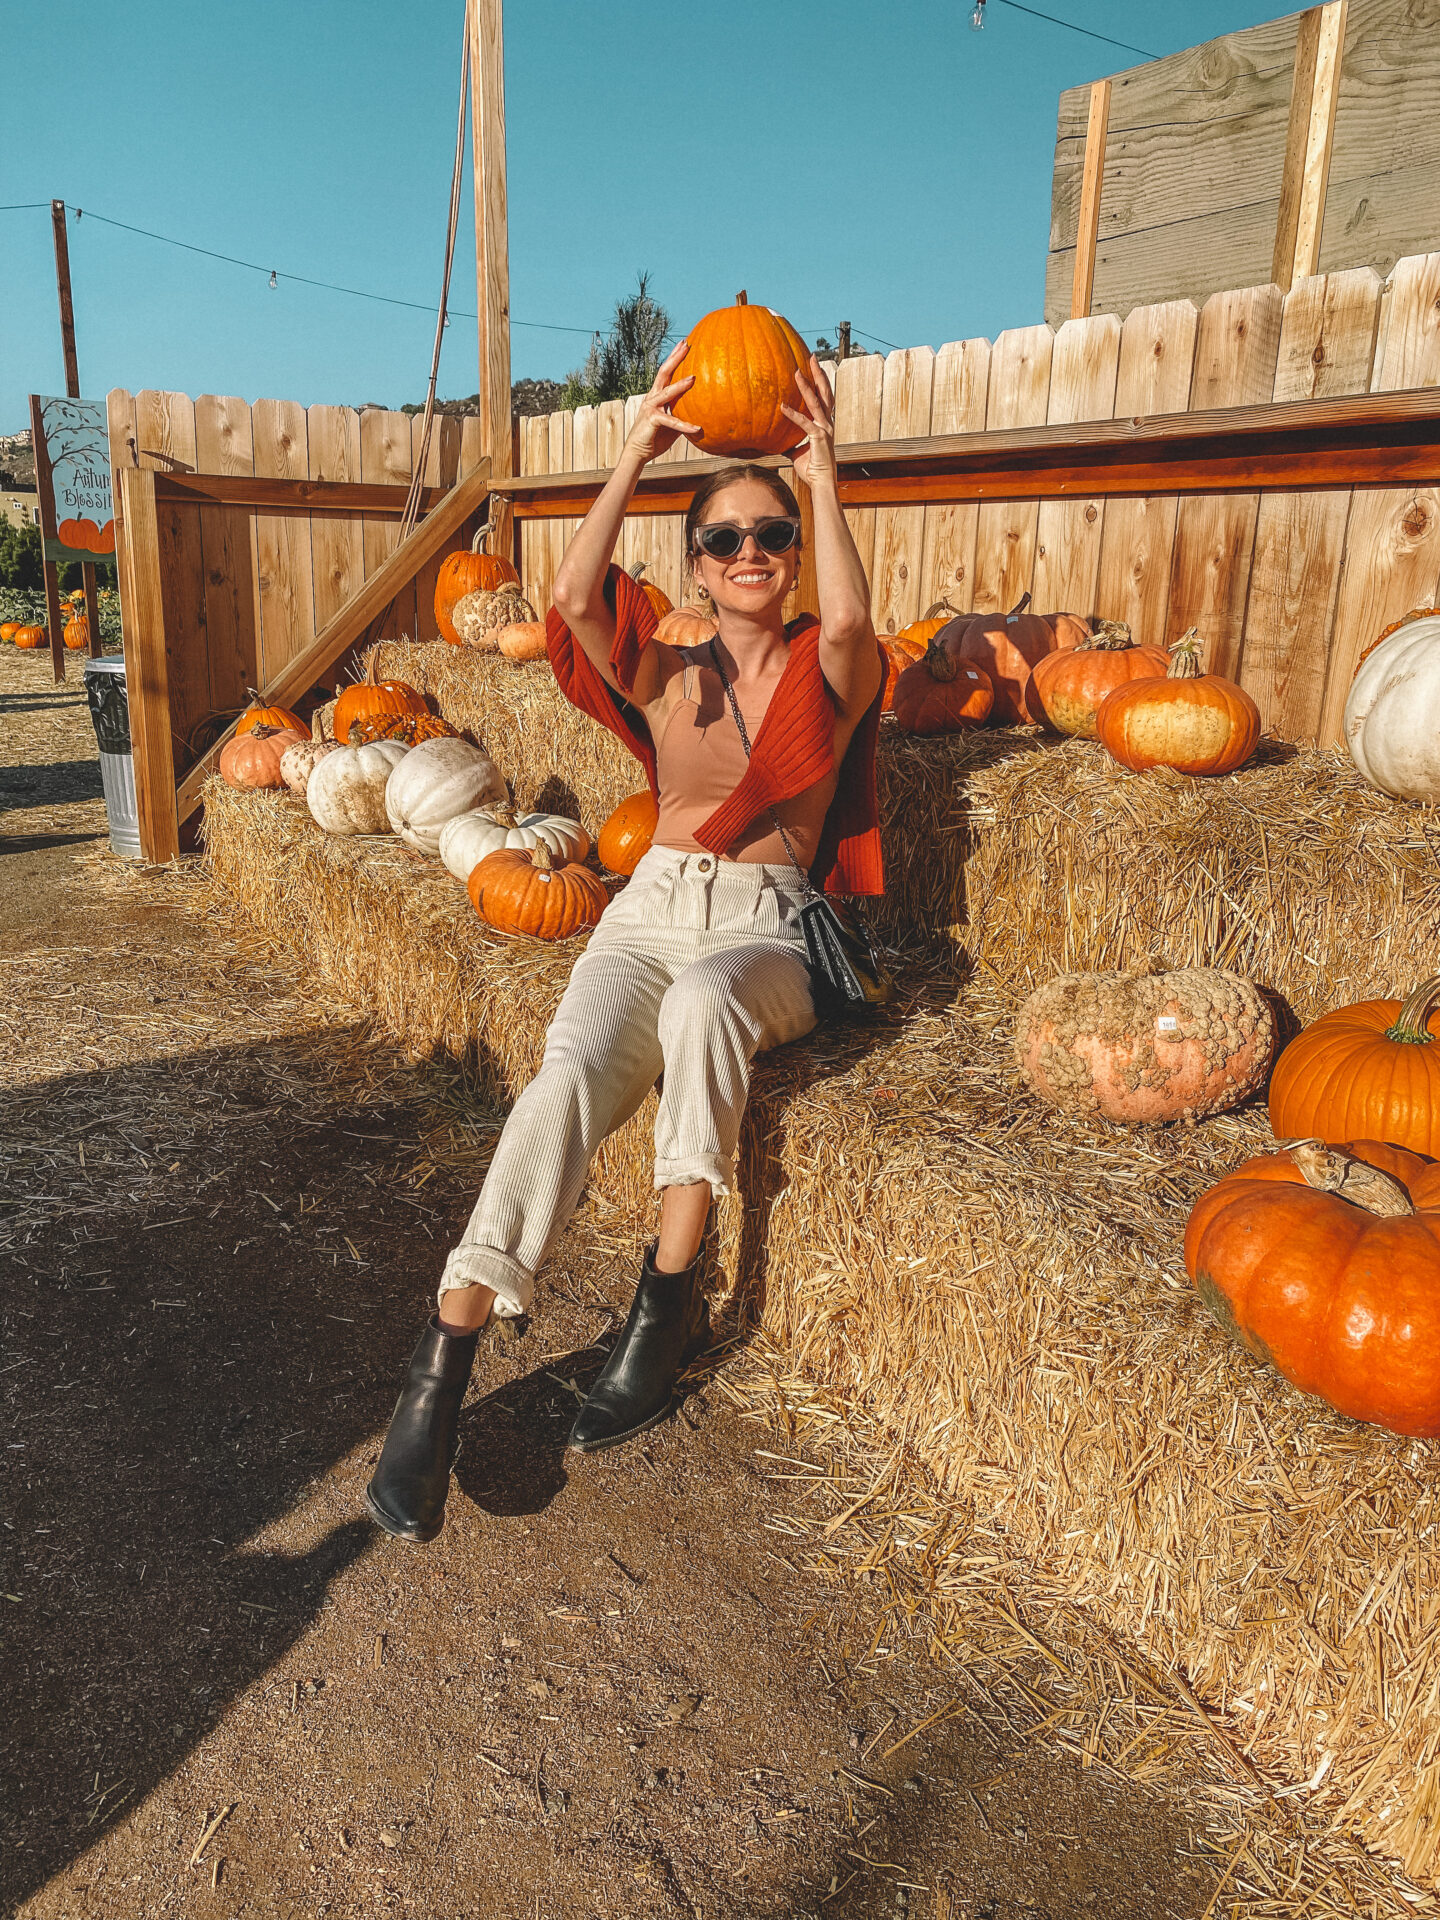 5 Pumpkin Patch Outfit Ideas to try this Fall - Palm Trees & Pelllegrino